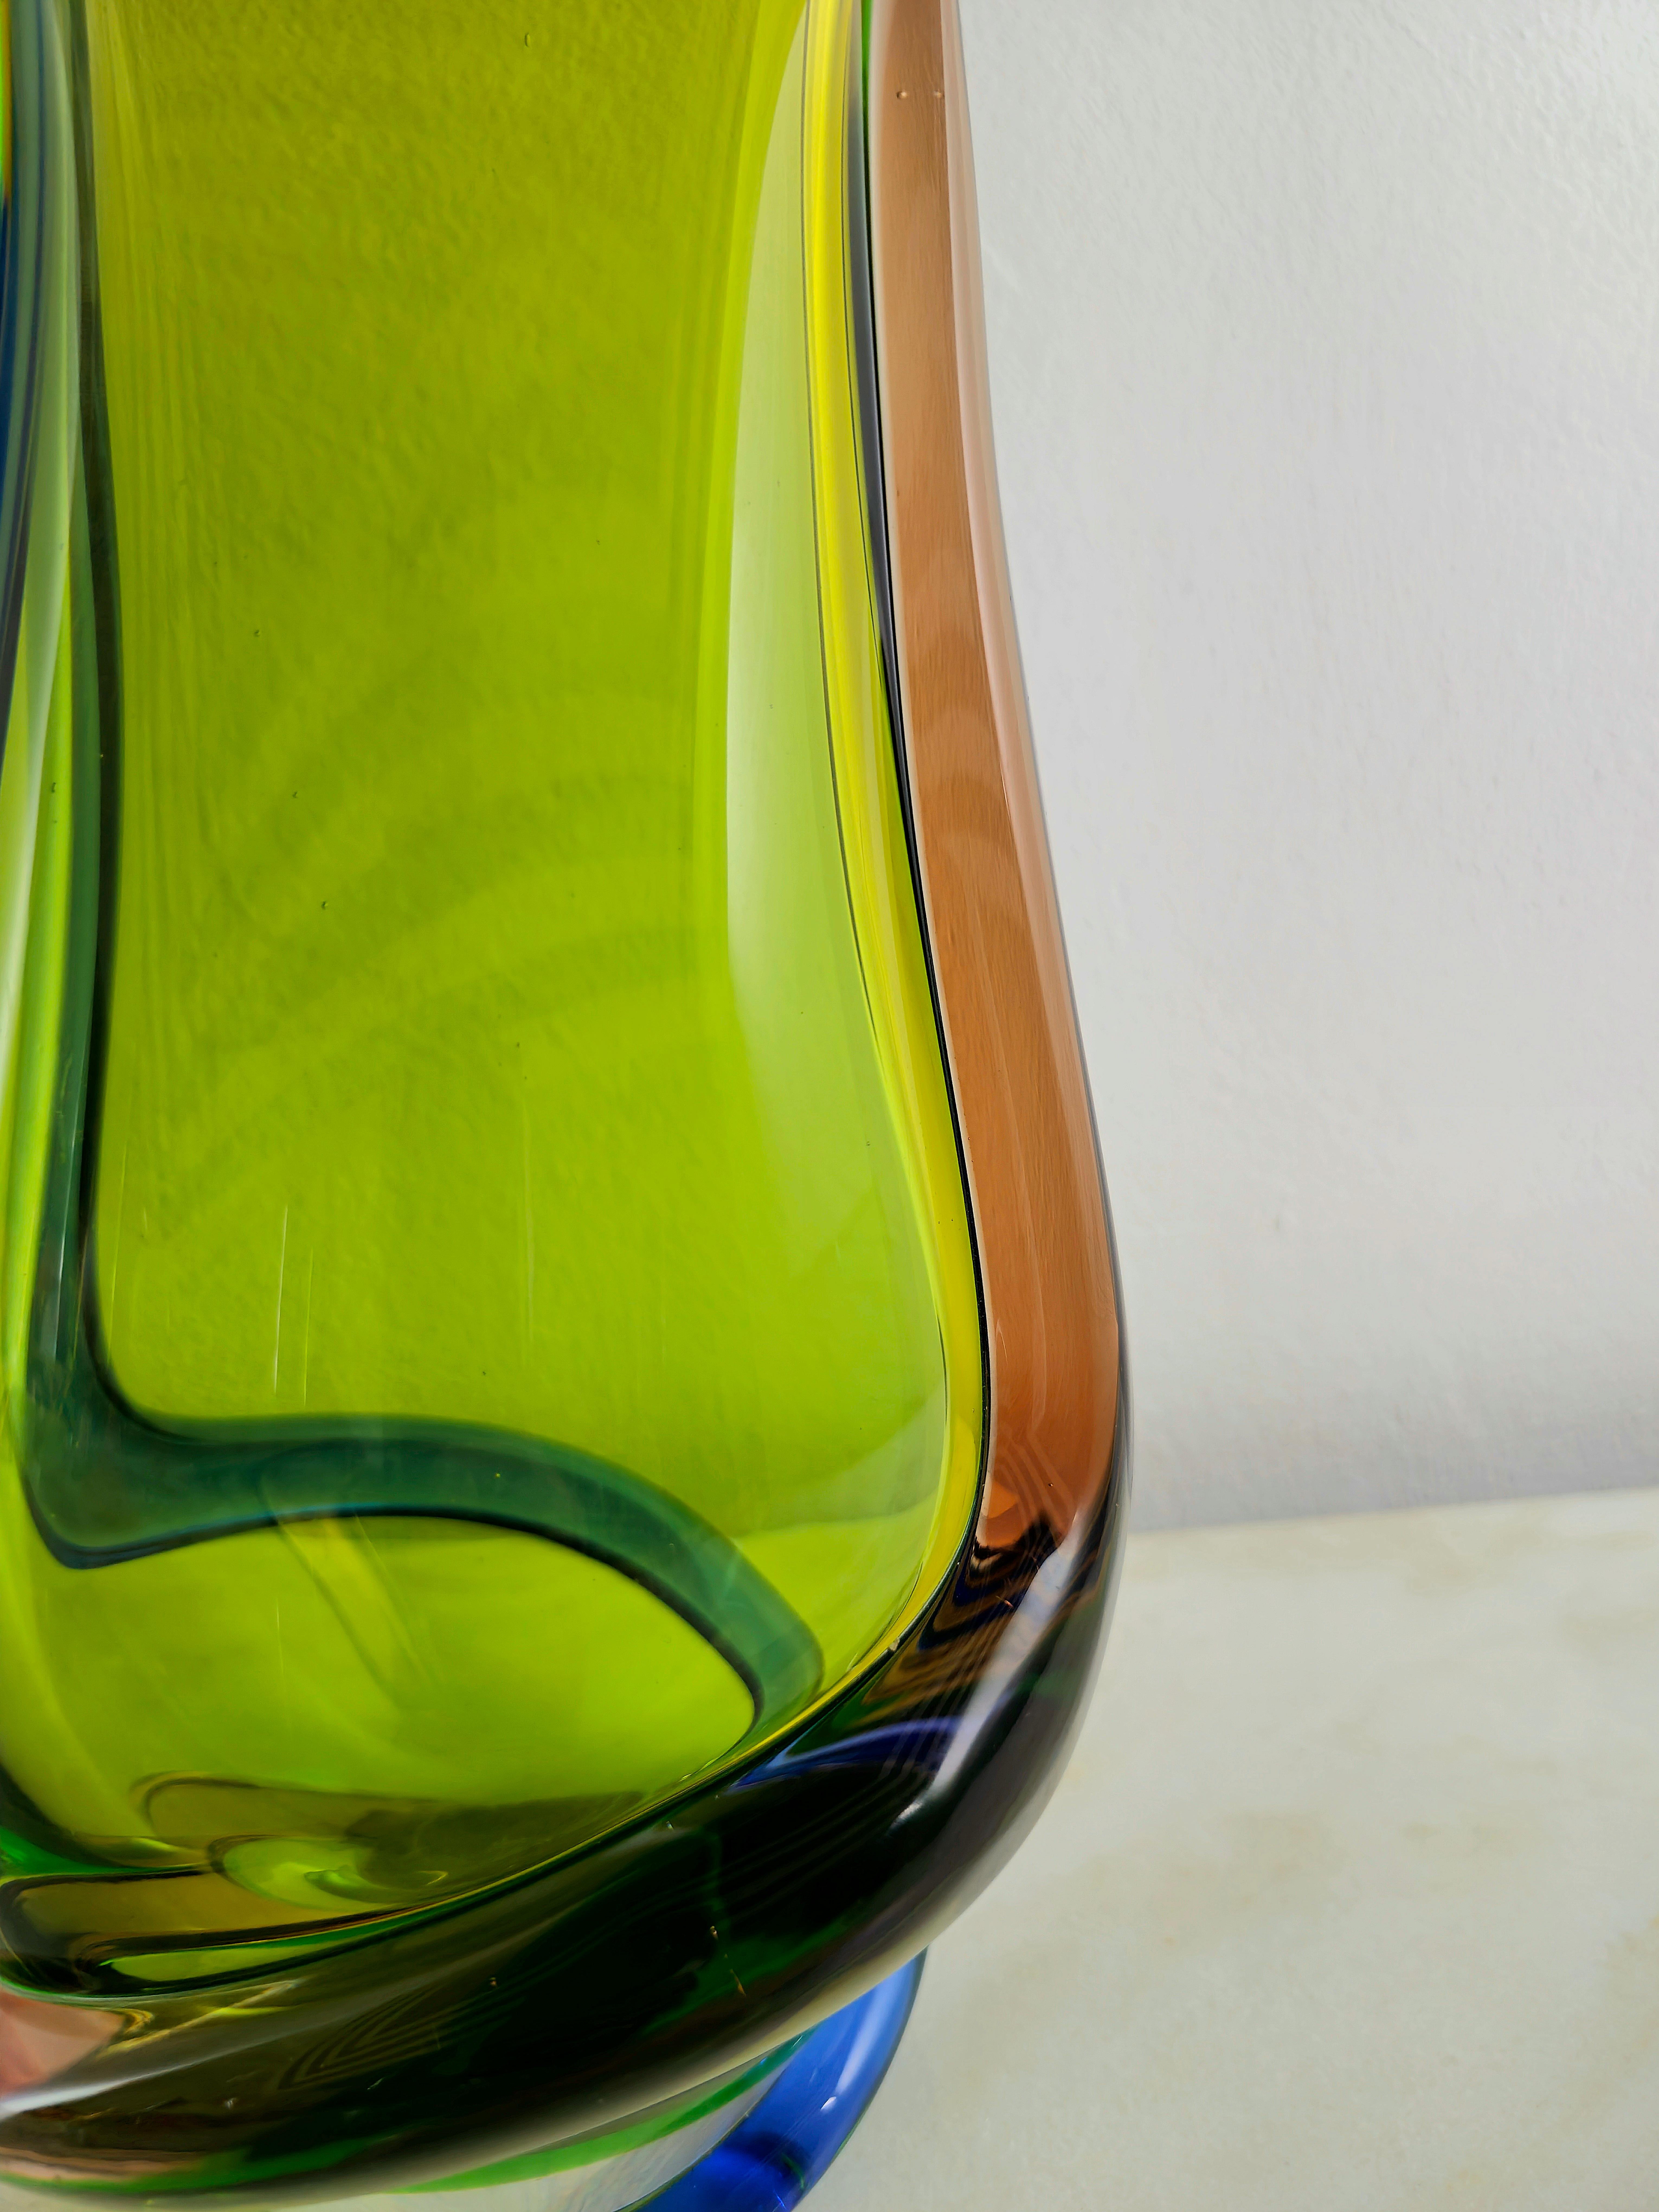 Vase Decorative Object Murano Glass Attributed to Flavio Poli Midcentury 1970s For Sale 2